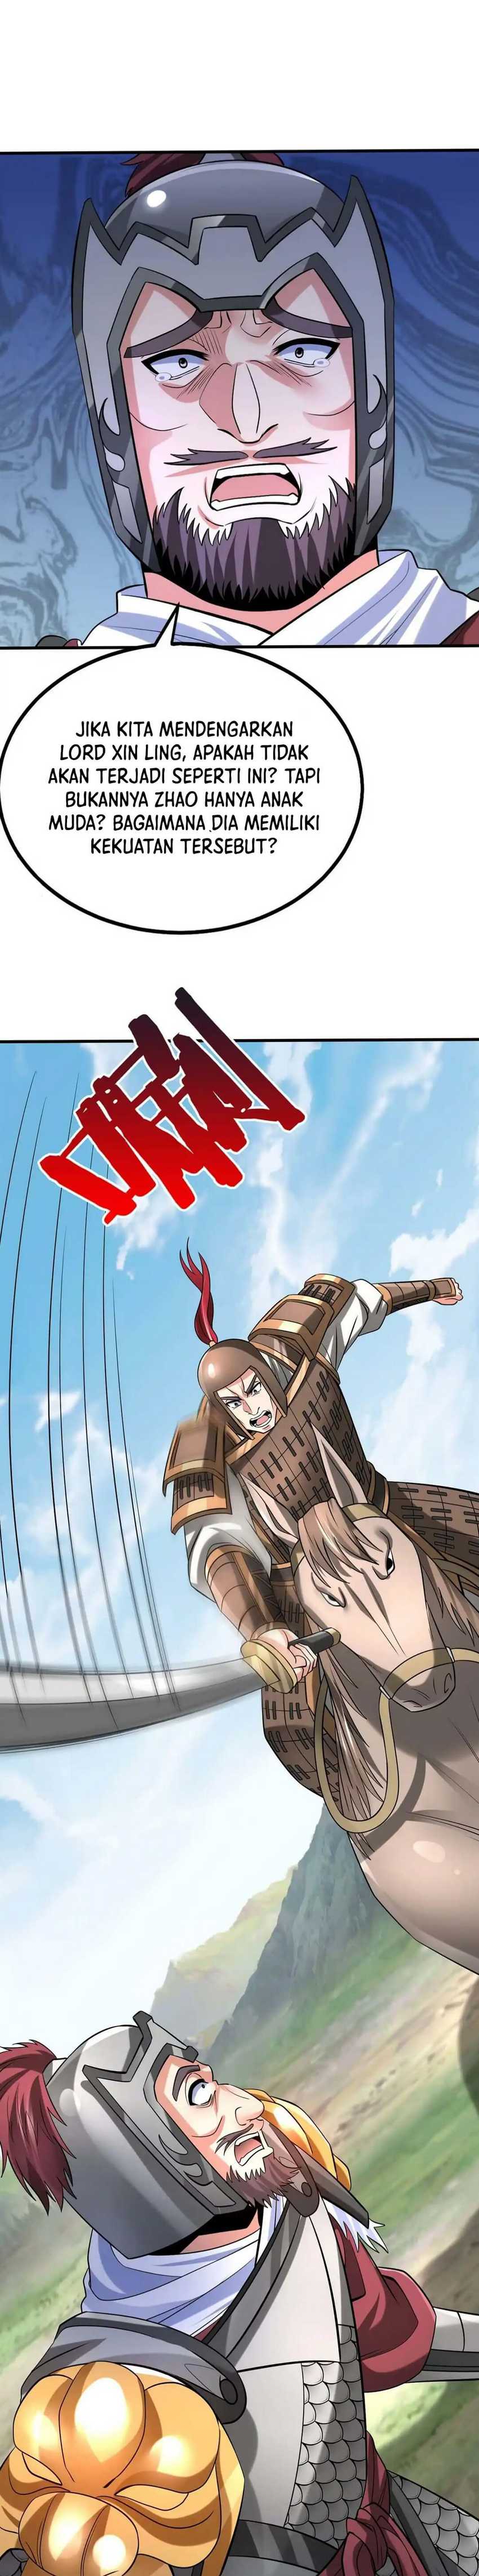 The Son of the First Emperor Kills Enemies and Becomes a God Chapter 60